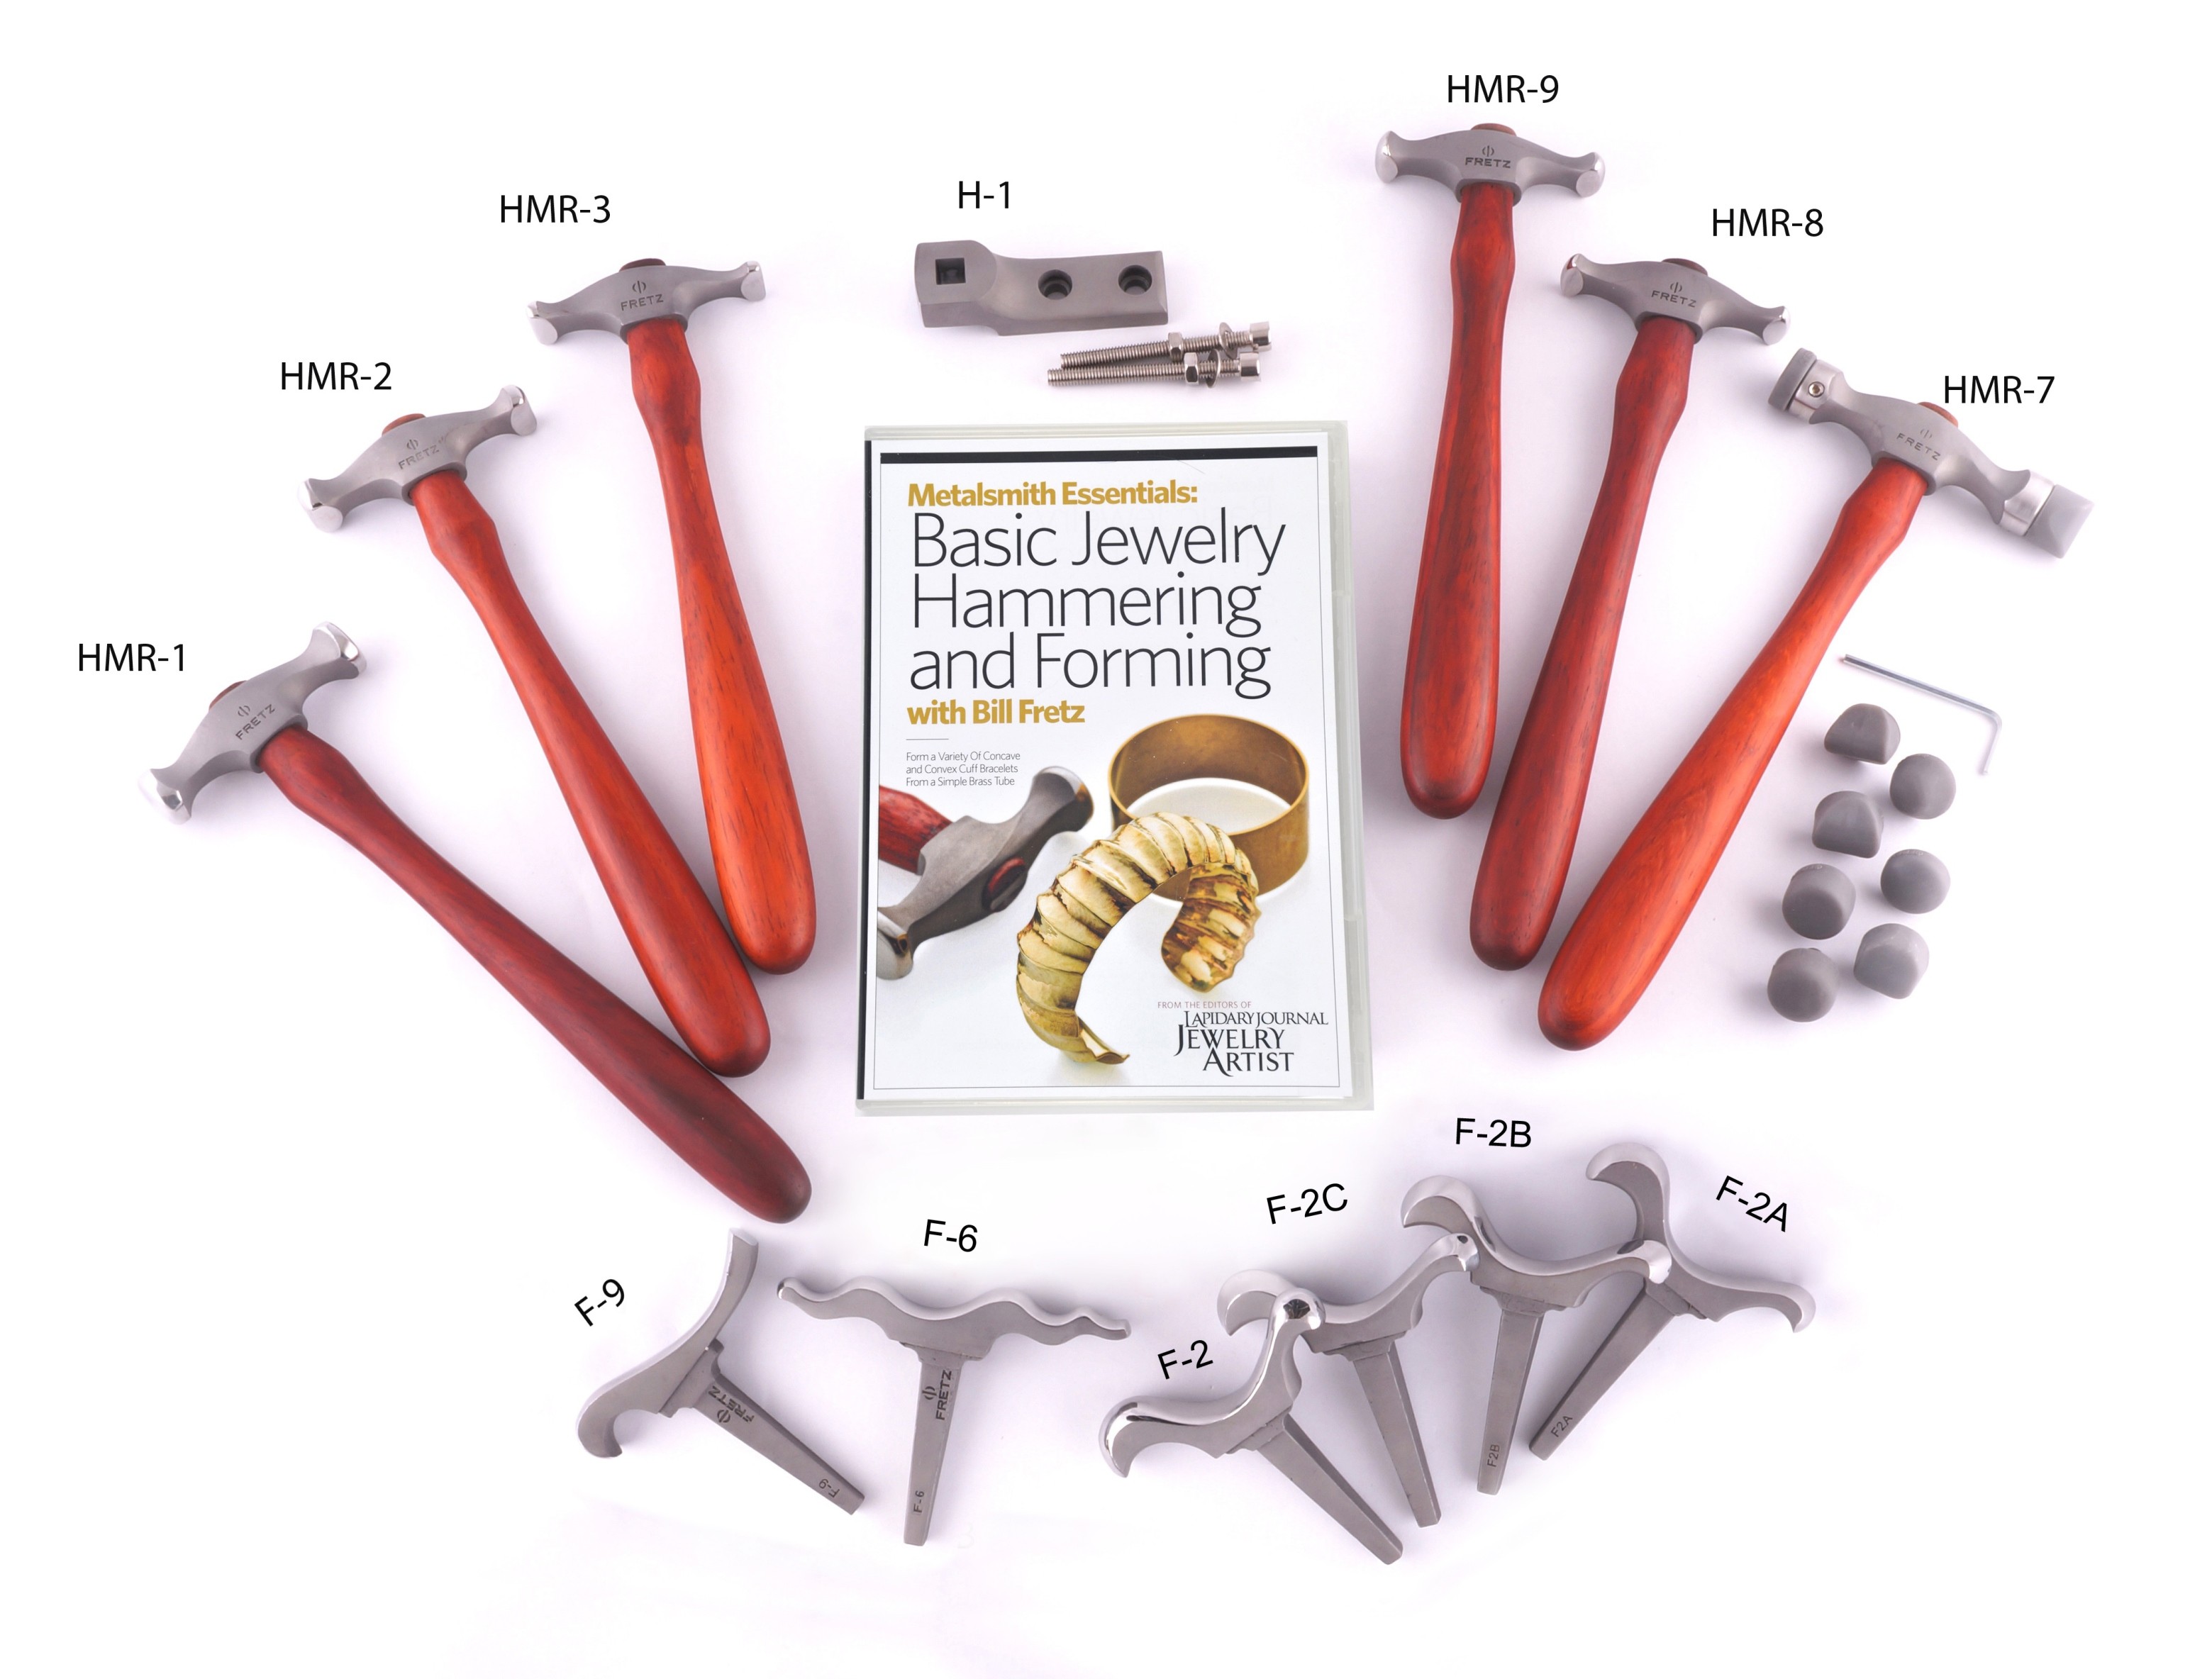 JA-1 Basic Hammering and Forming Jewelry Cuff Bracelets and Fretz Tools